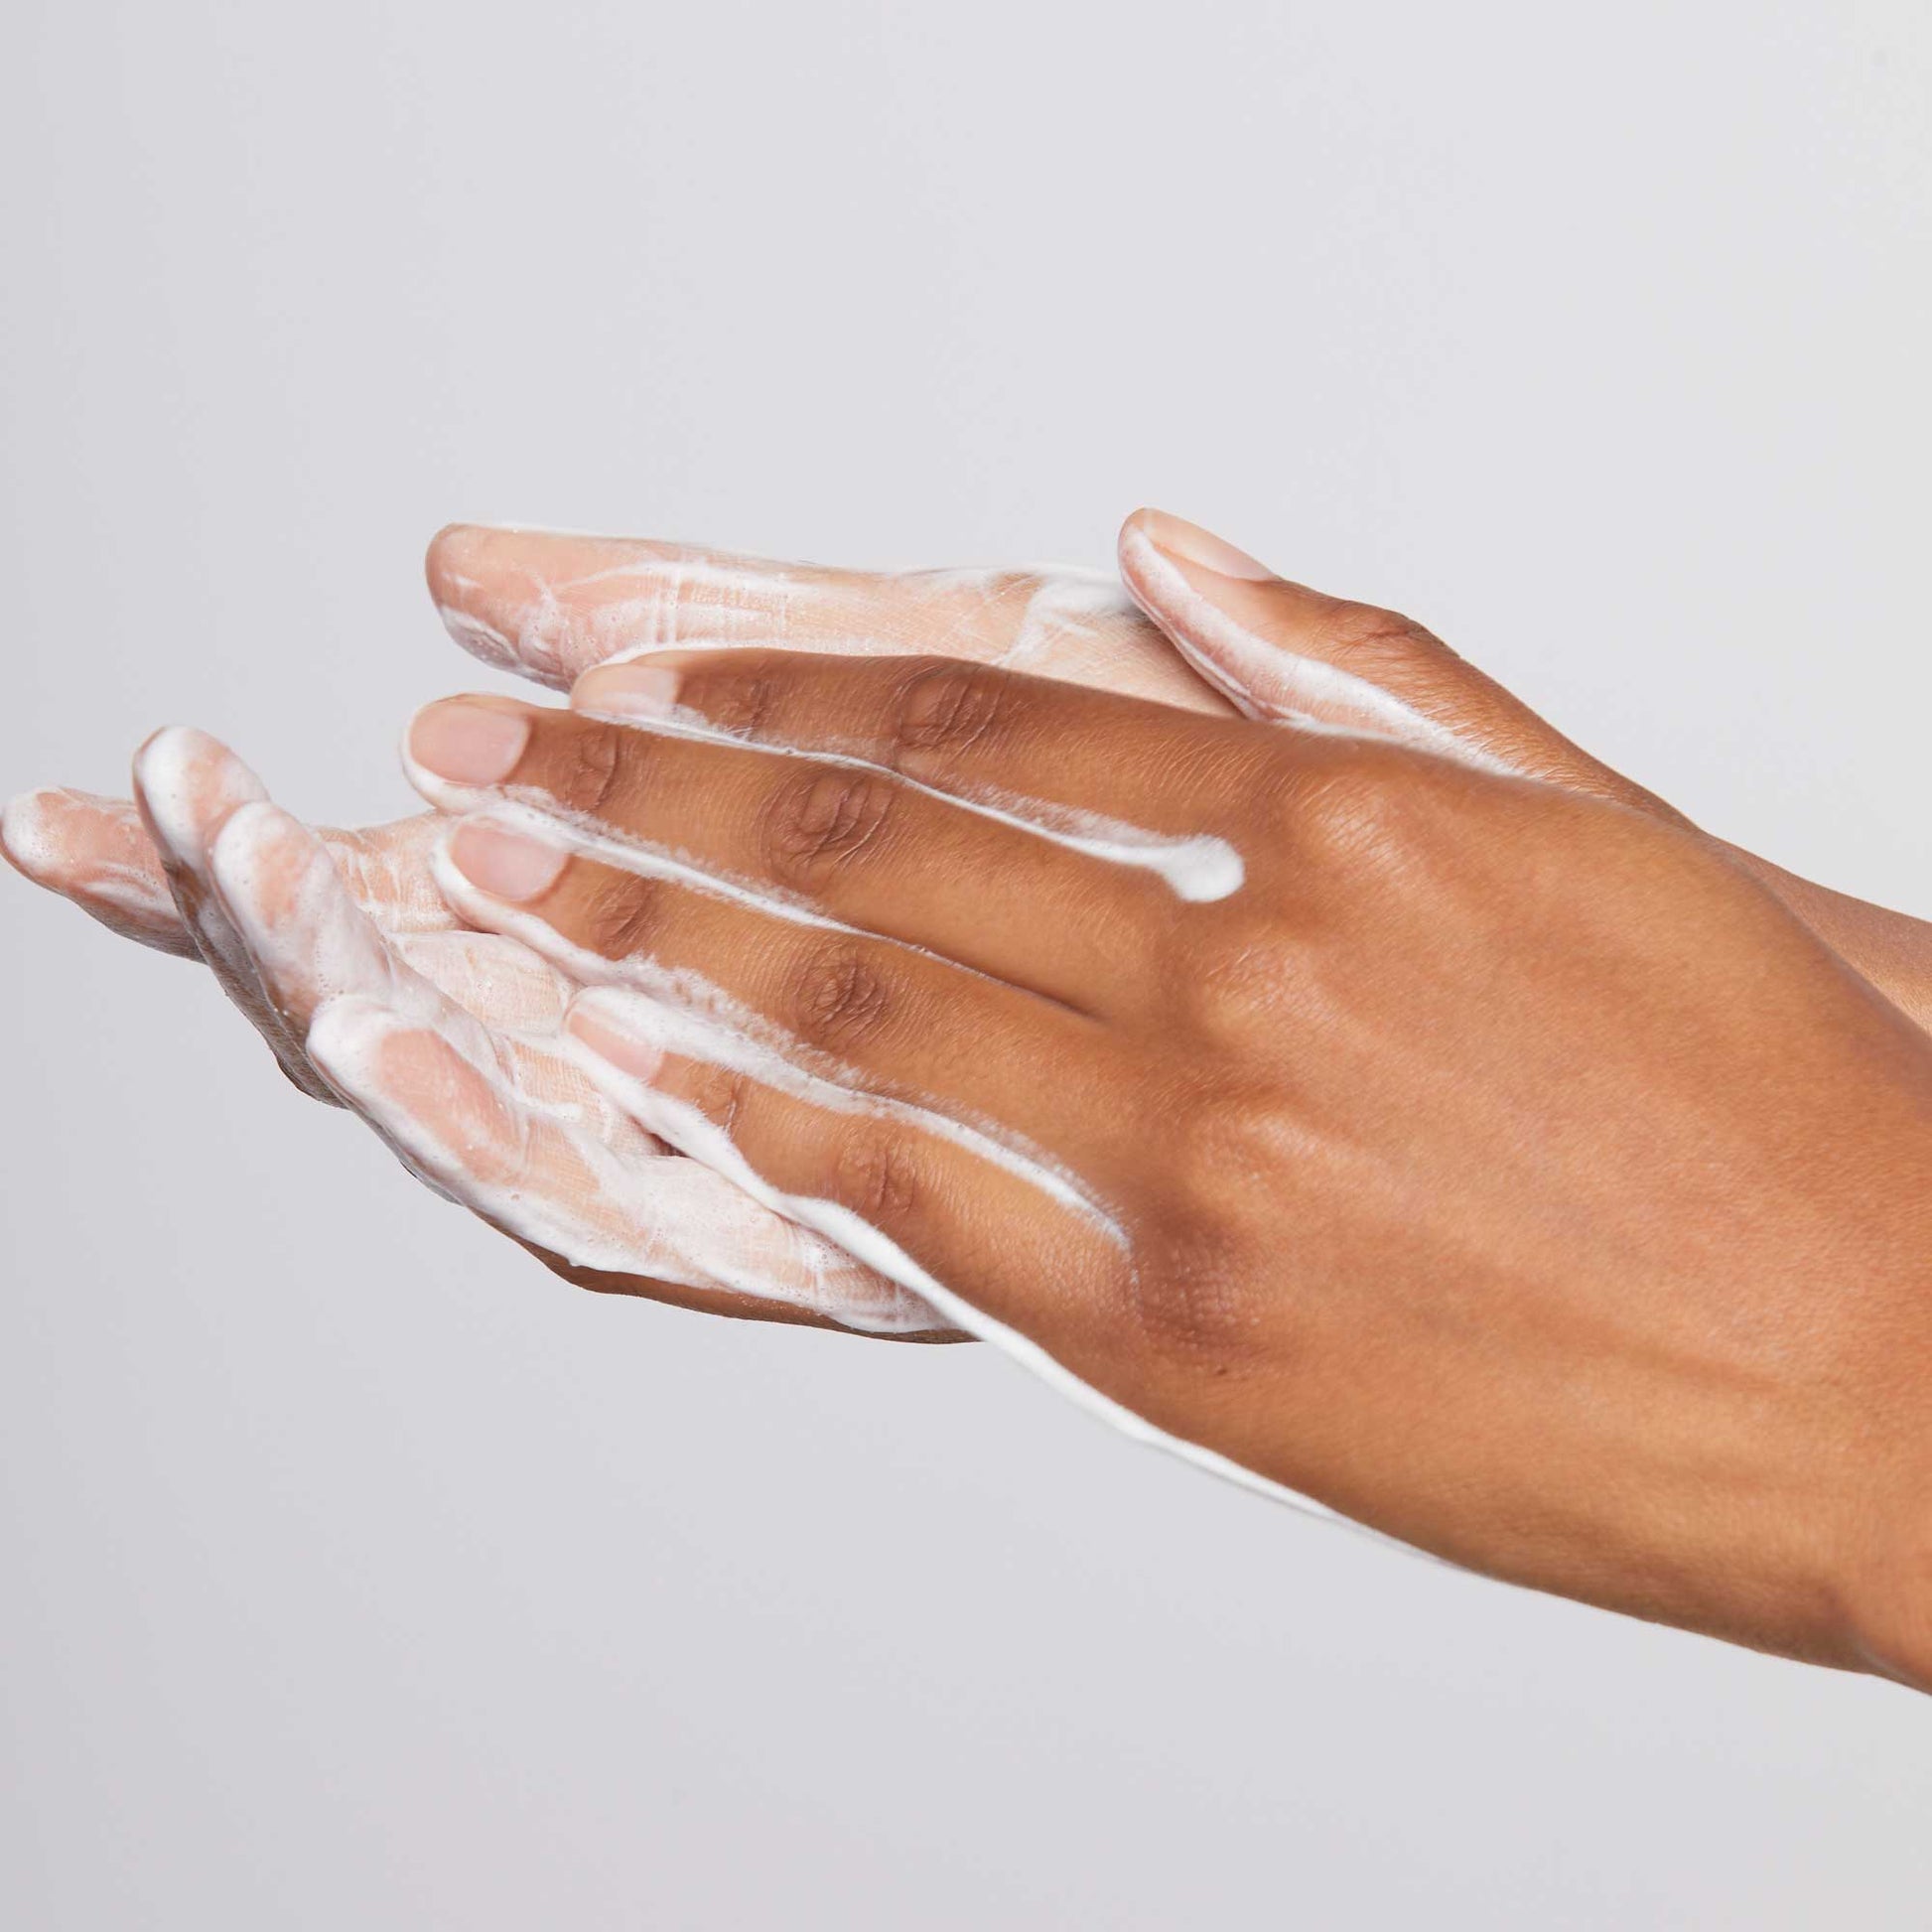 Daily Microfoliant powder being emulsified in wet hands, forming a light foam